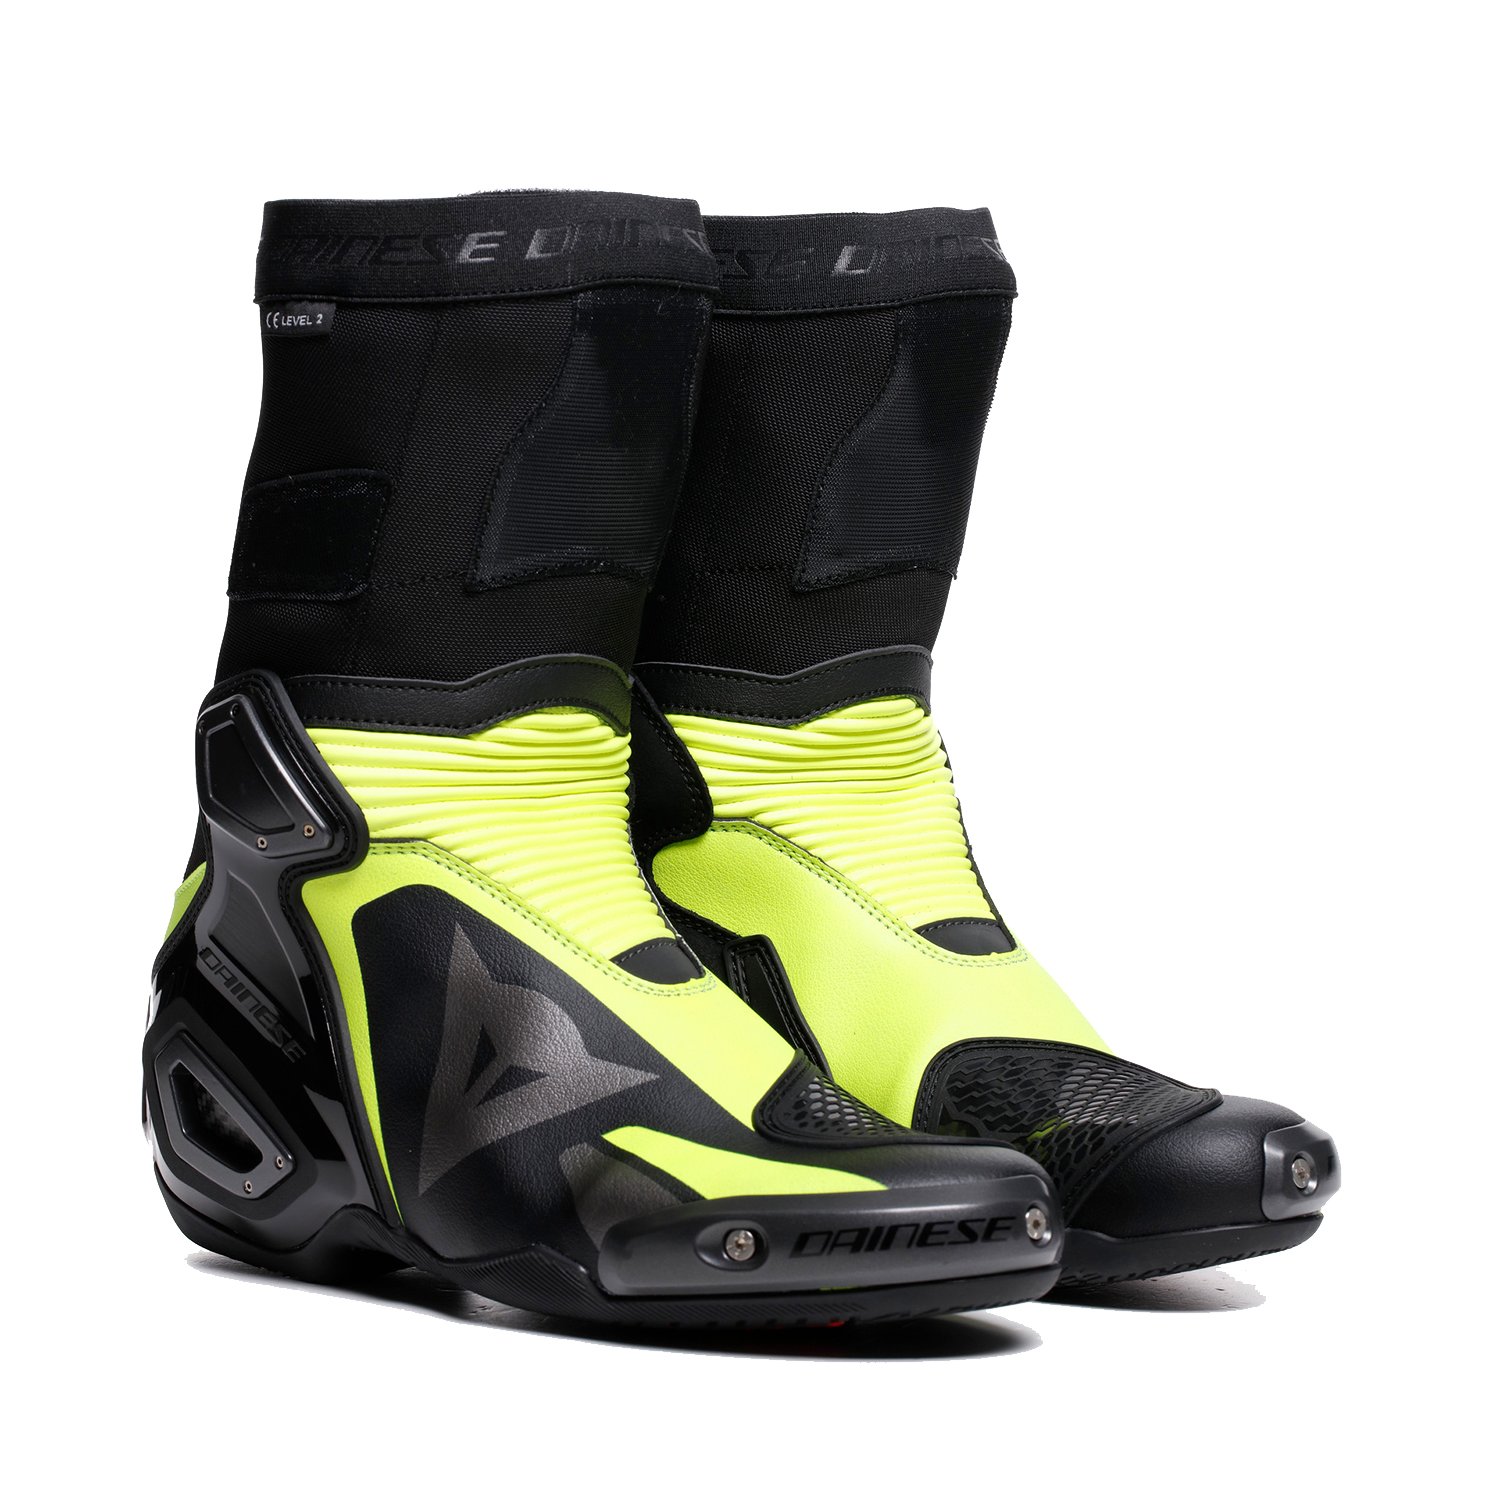 Image of Dainese Axial 2 Boots Black Yellow Fluo Größe 41